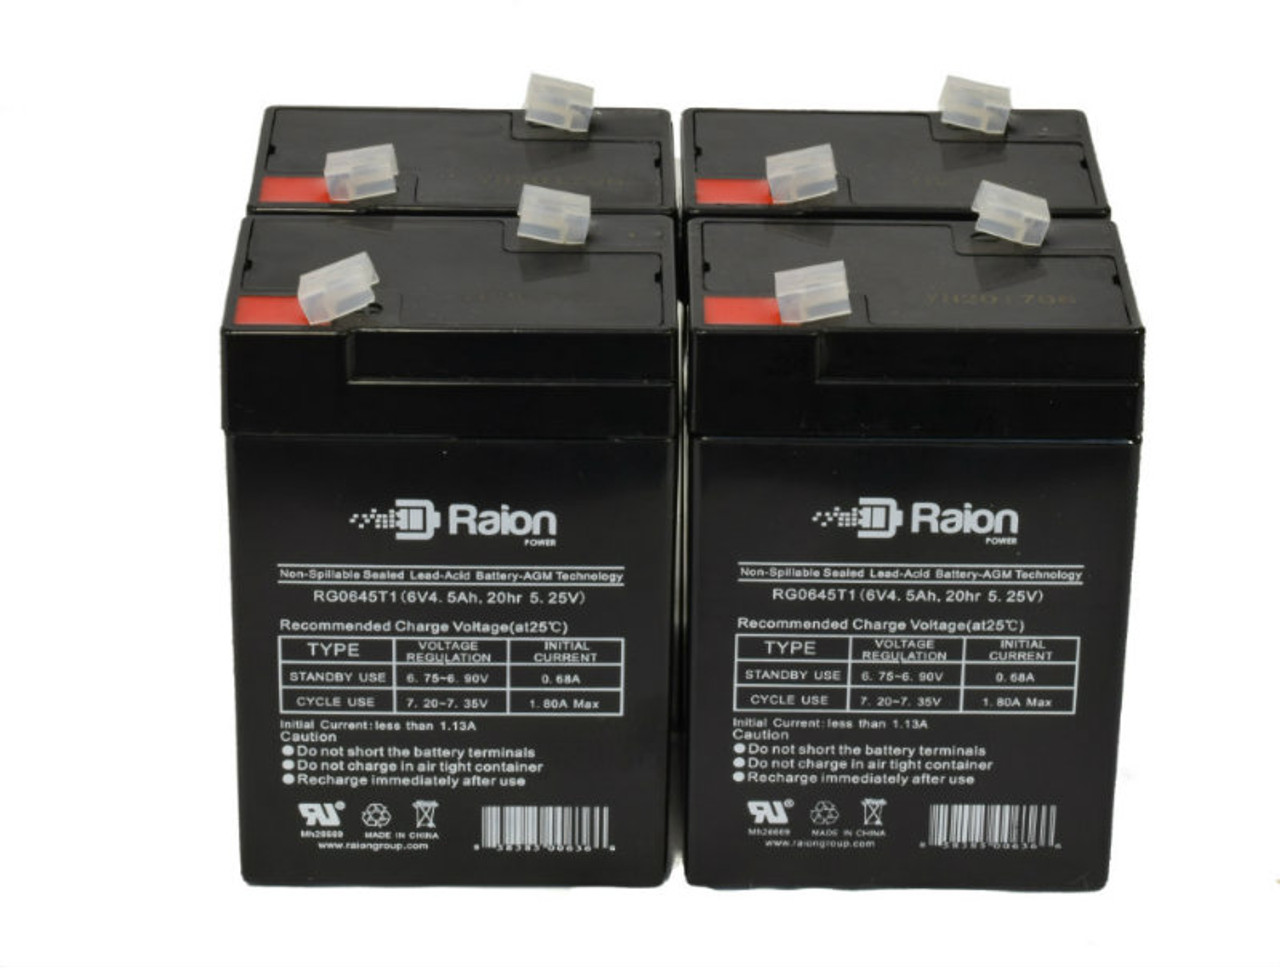 Raion Power 6V 4.5Ah Replacement Emergency Light Battery for Dual-Lite LTUGB - 4 Pack